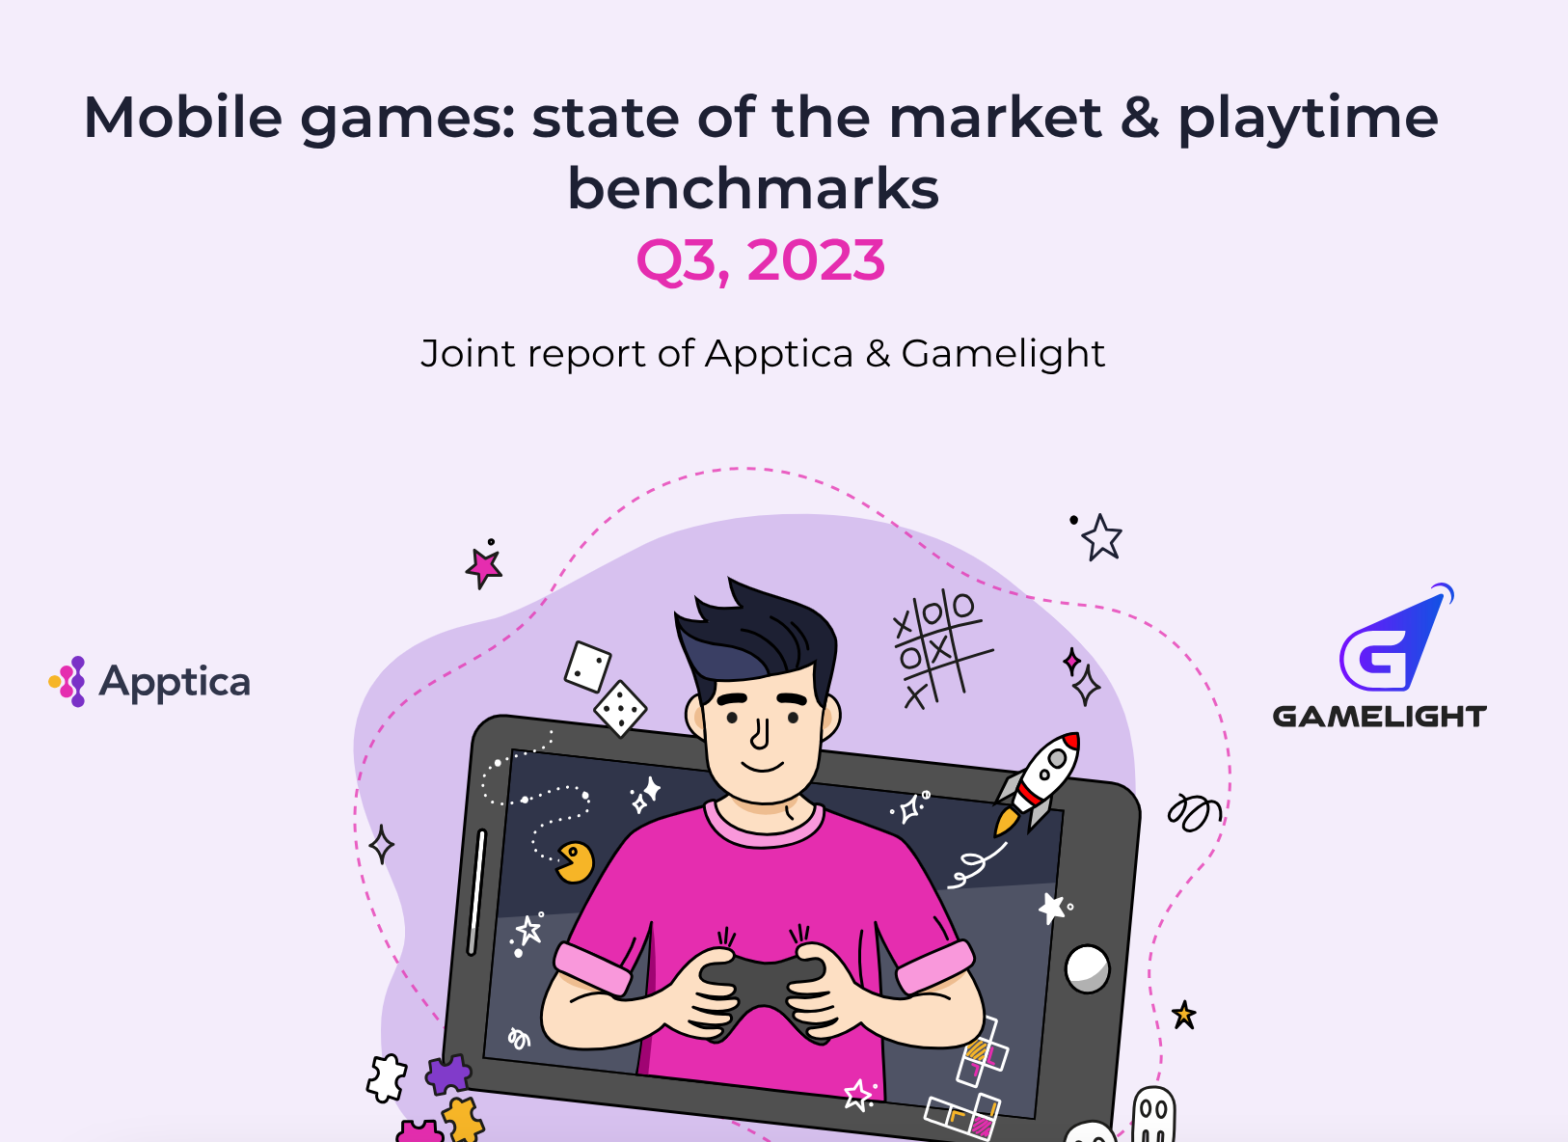 Mobile Gaming Market in the third quarter of 2023